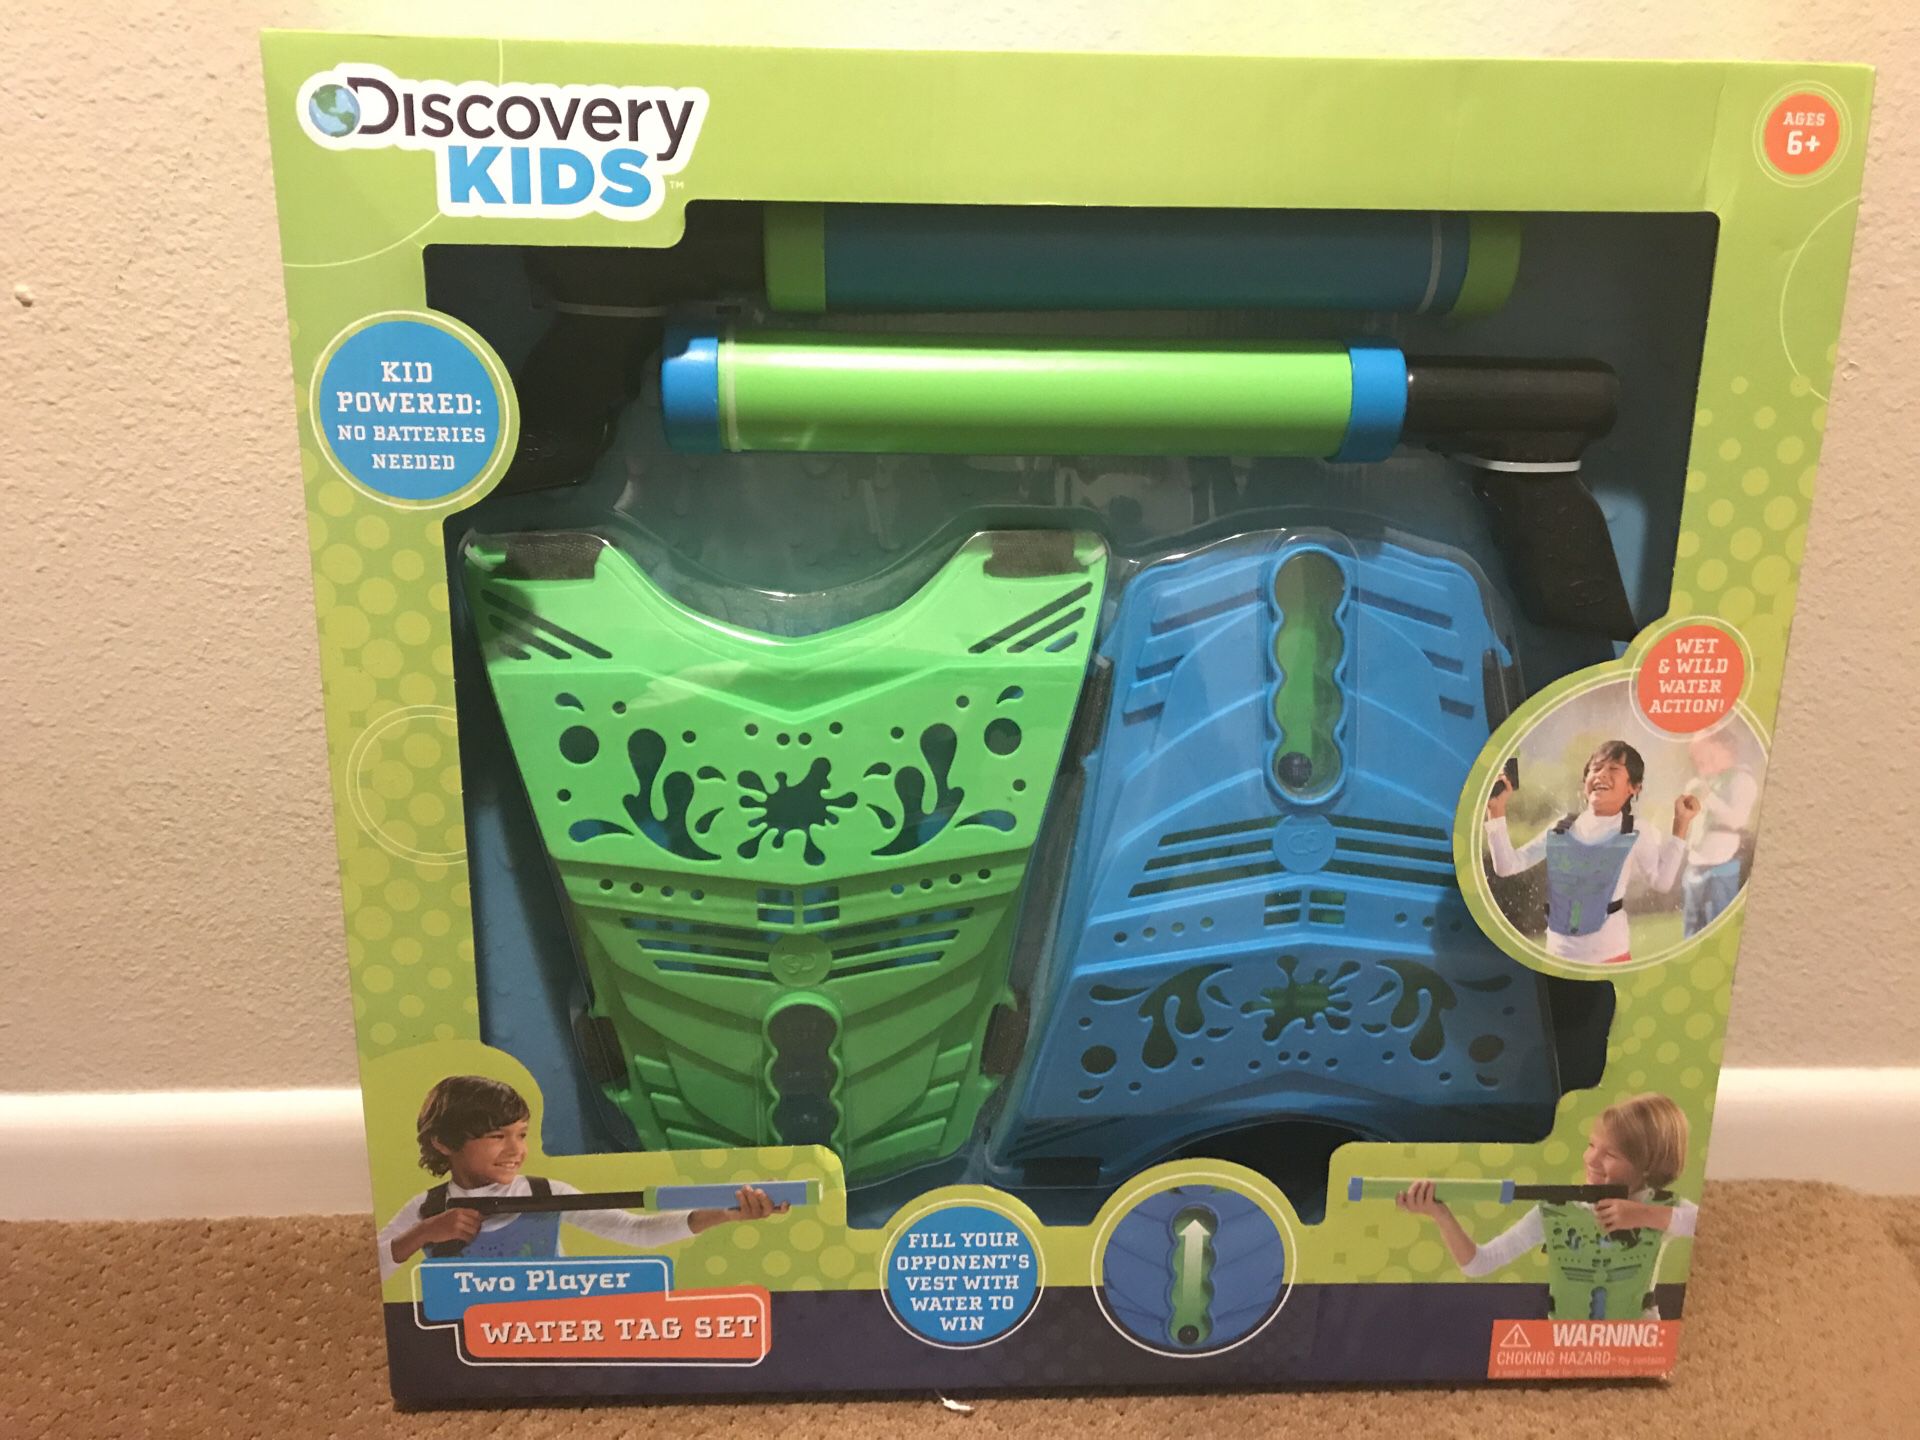 Discovery Kids Water Tag Set